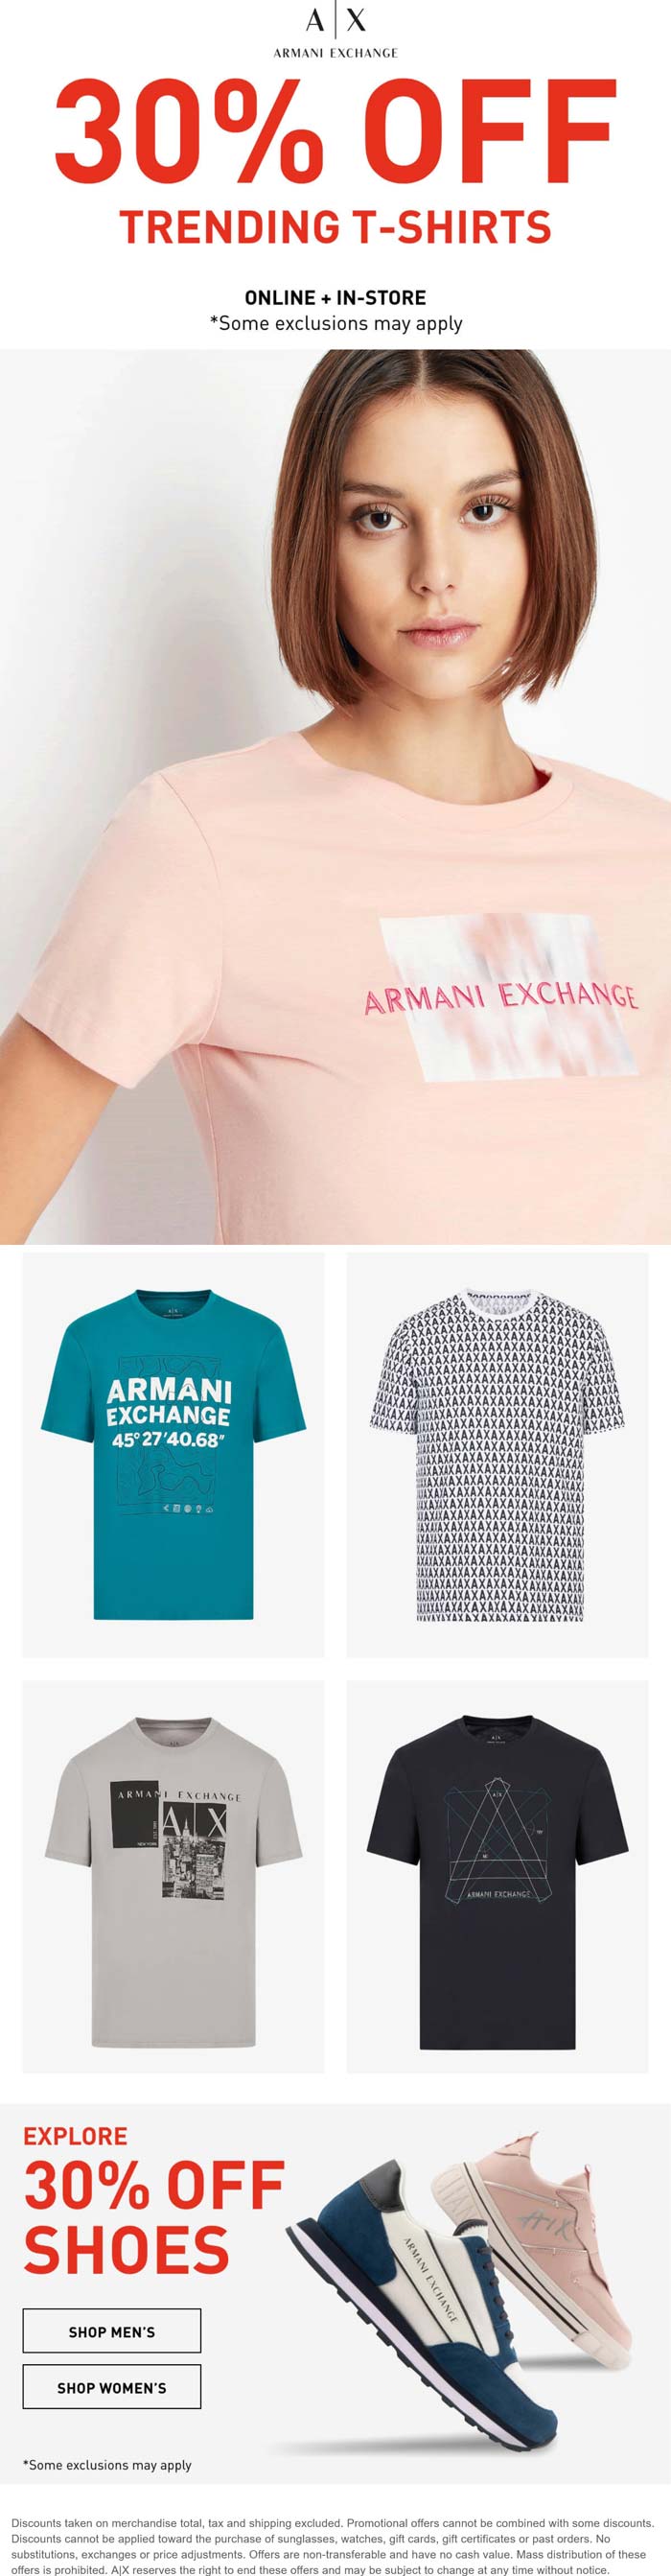 Armani Exchange stores Coupon  30% off shoes & trending t-shirts at Armani Exchange, ditto online #armaniexchange 